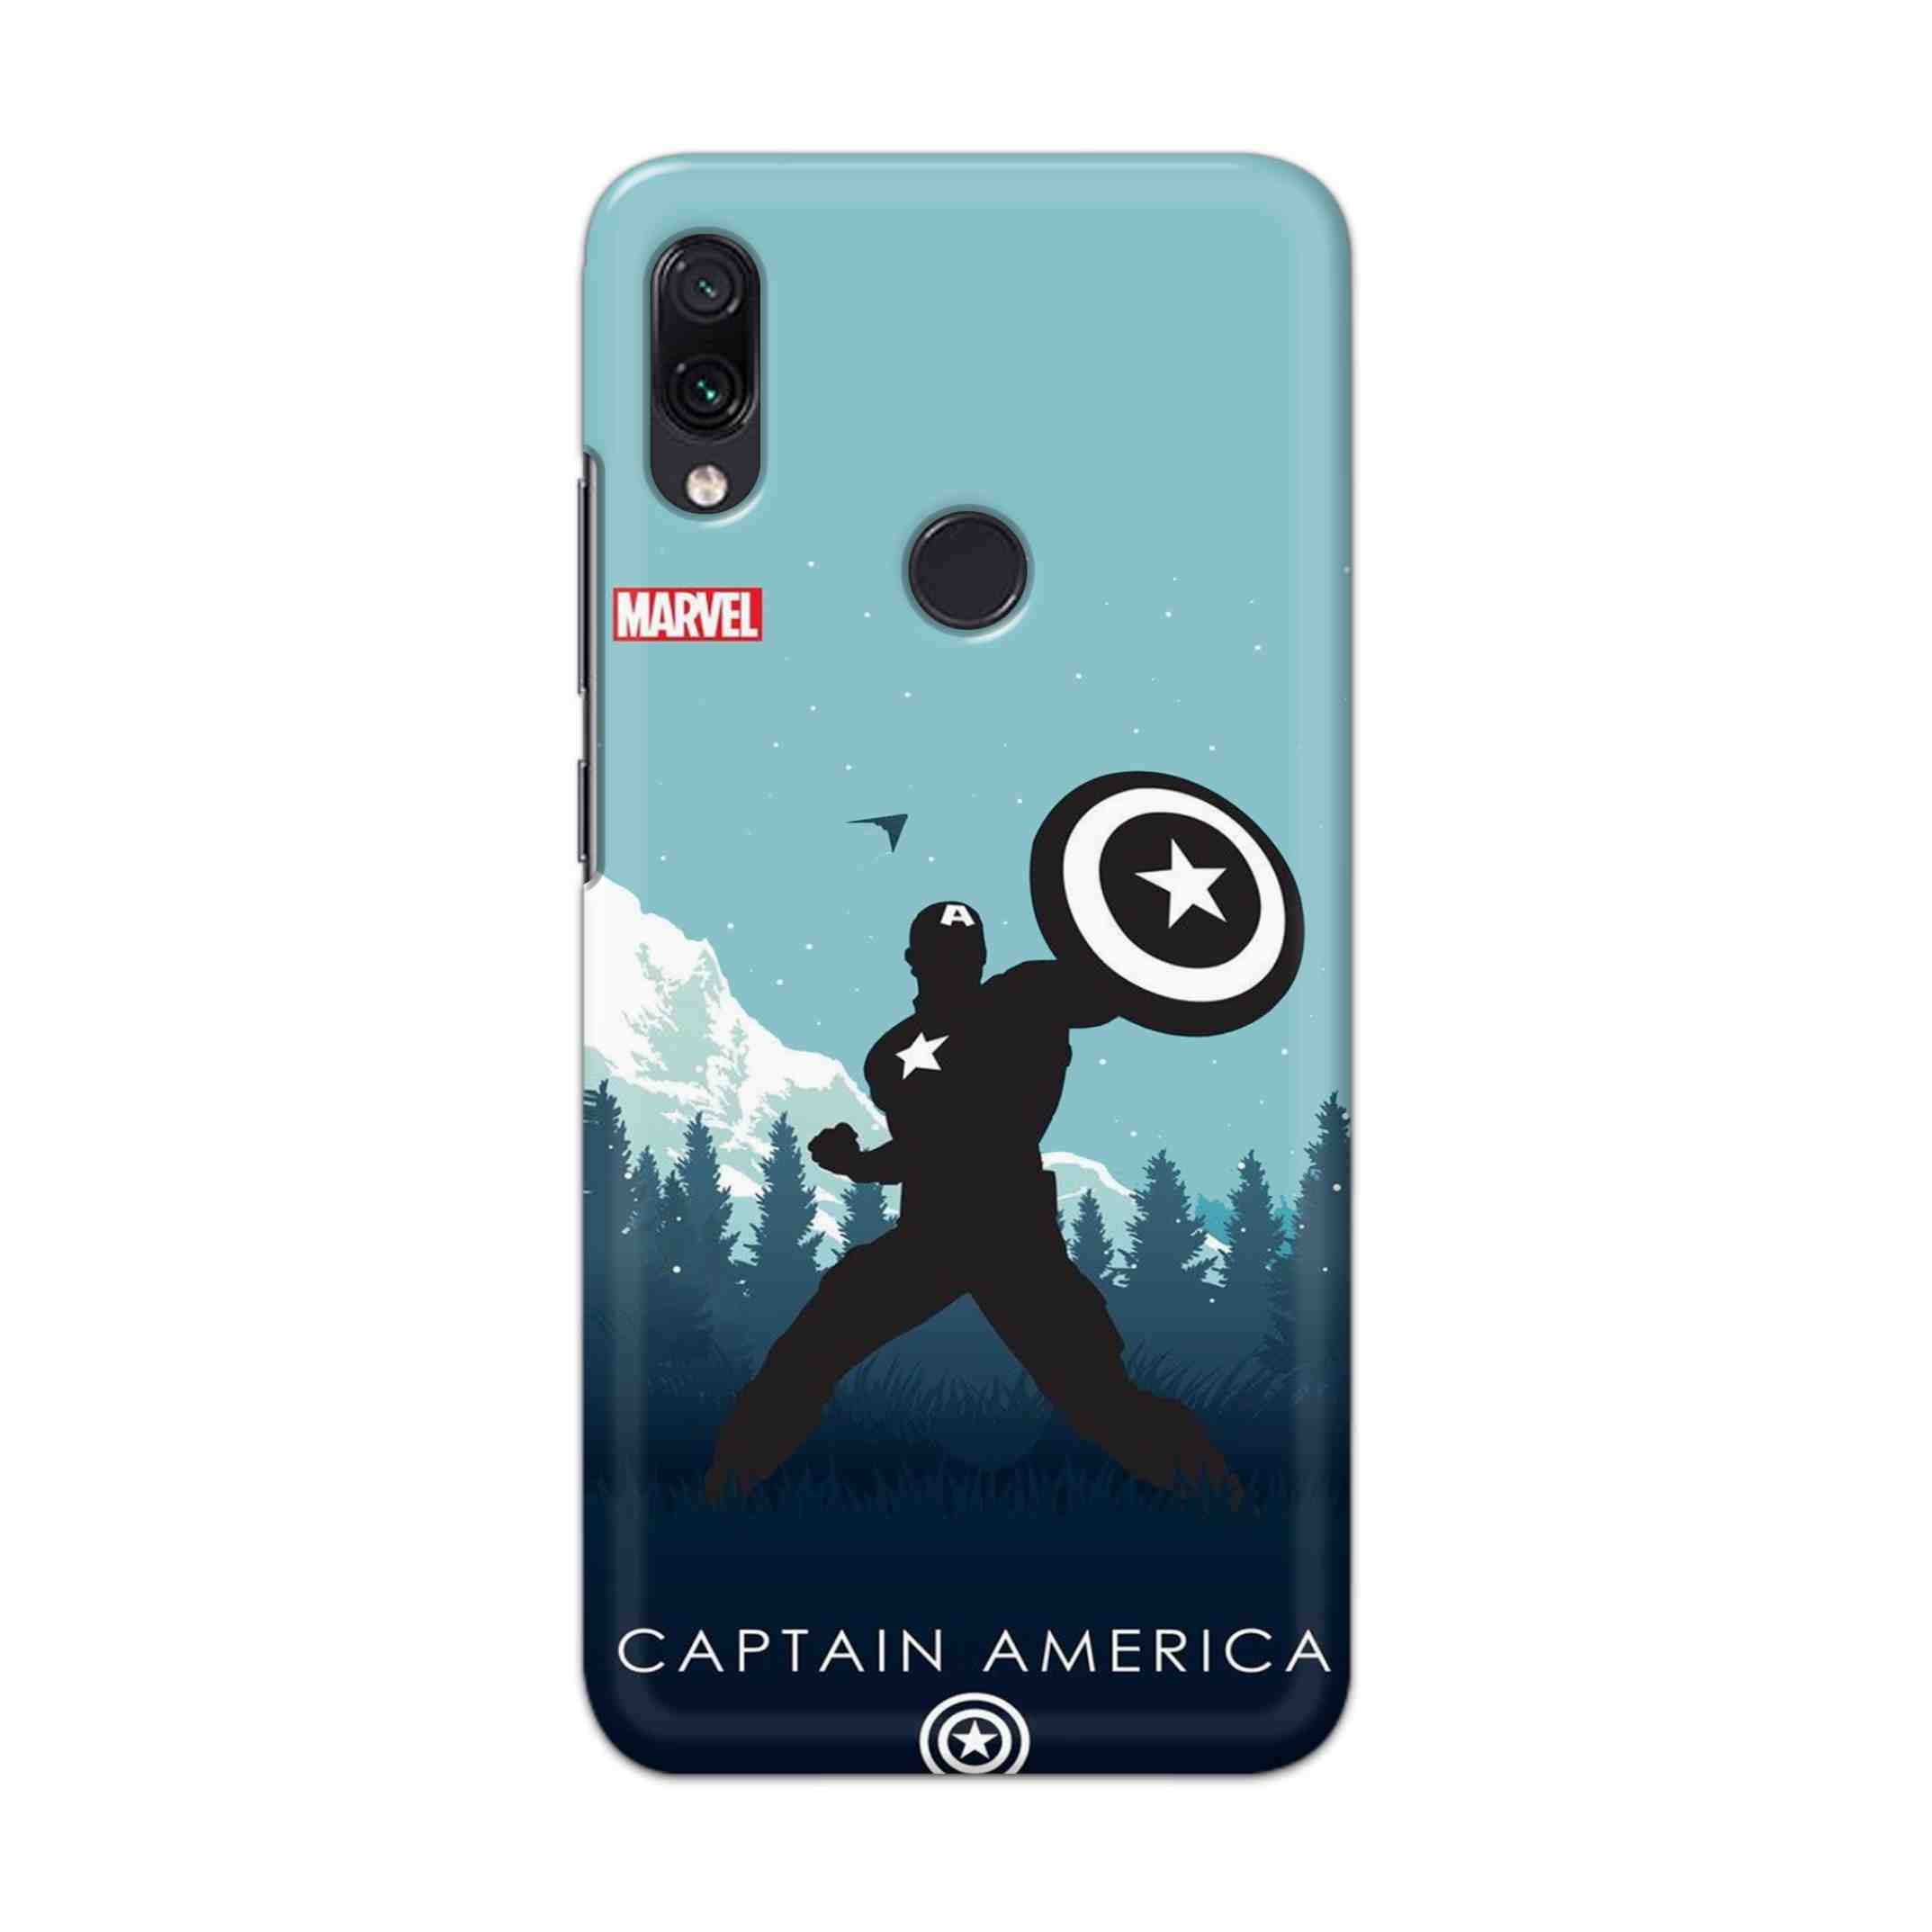 Buy Captain America Hard Back Mobile Phone Case Cover For Redmi Note 7 / Note 7 Pro Online